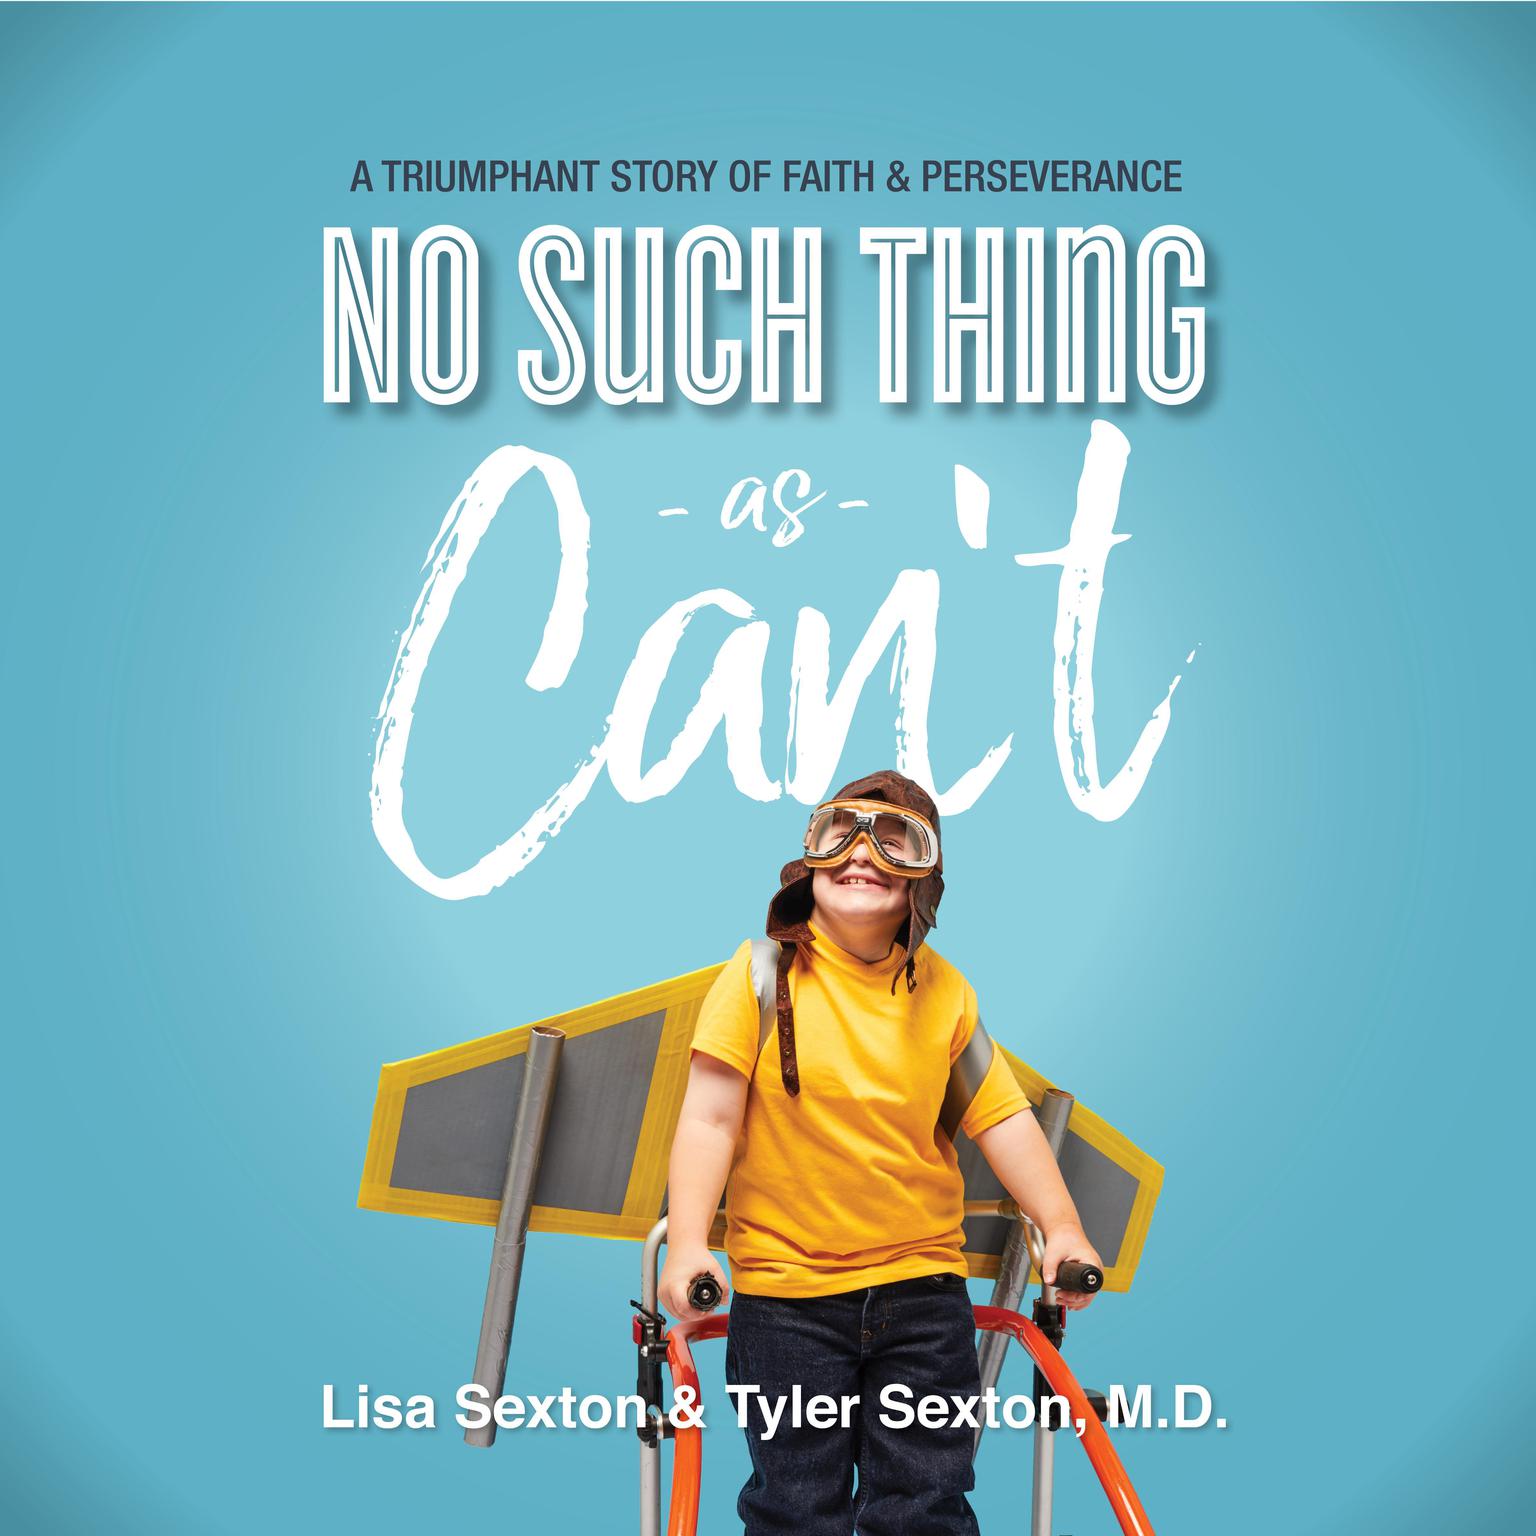 No Such Thing As Cant: A Triumphant Story of Faith and Perserverance Audiobook, by Lisa Sexton